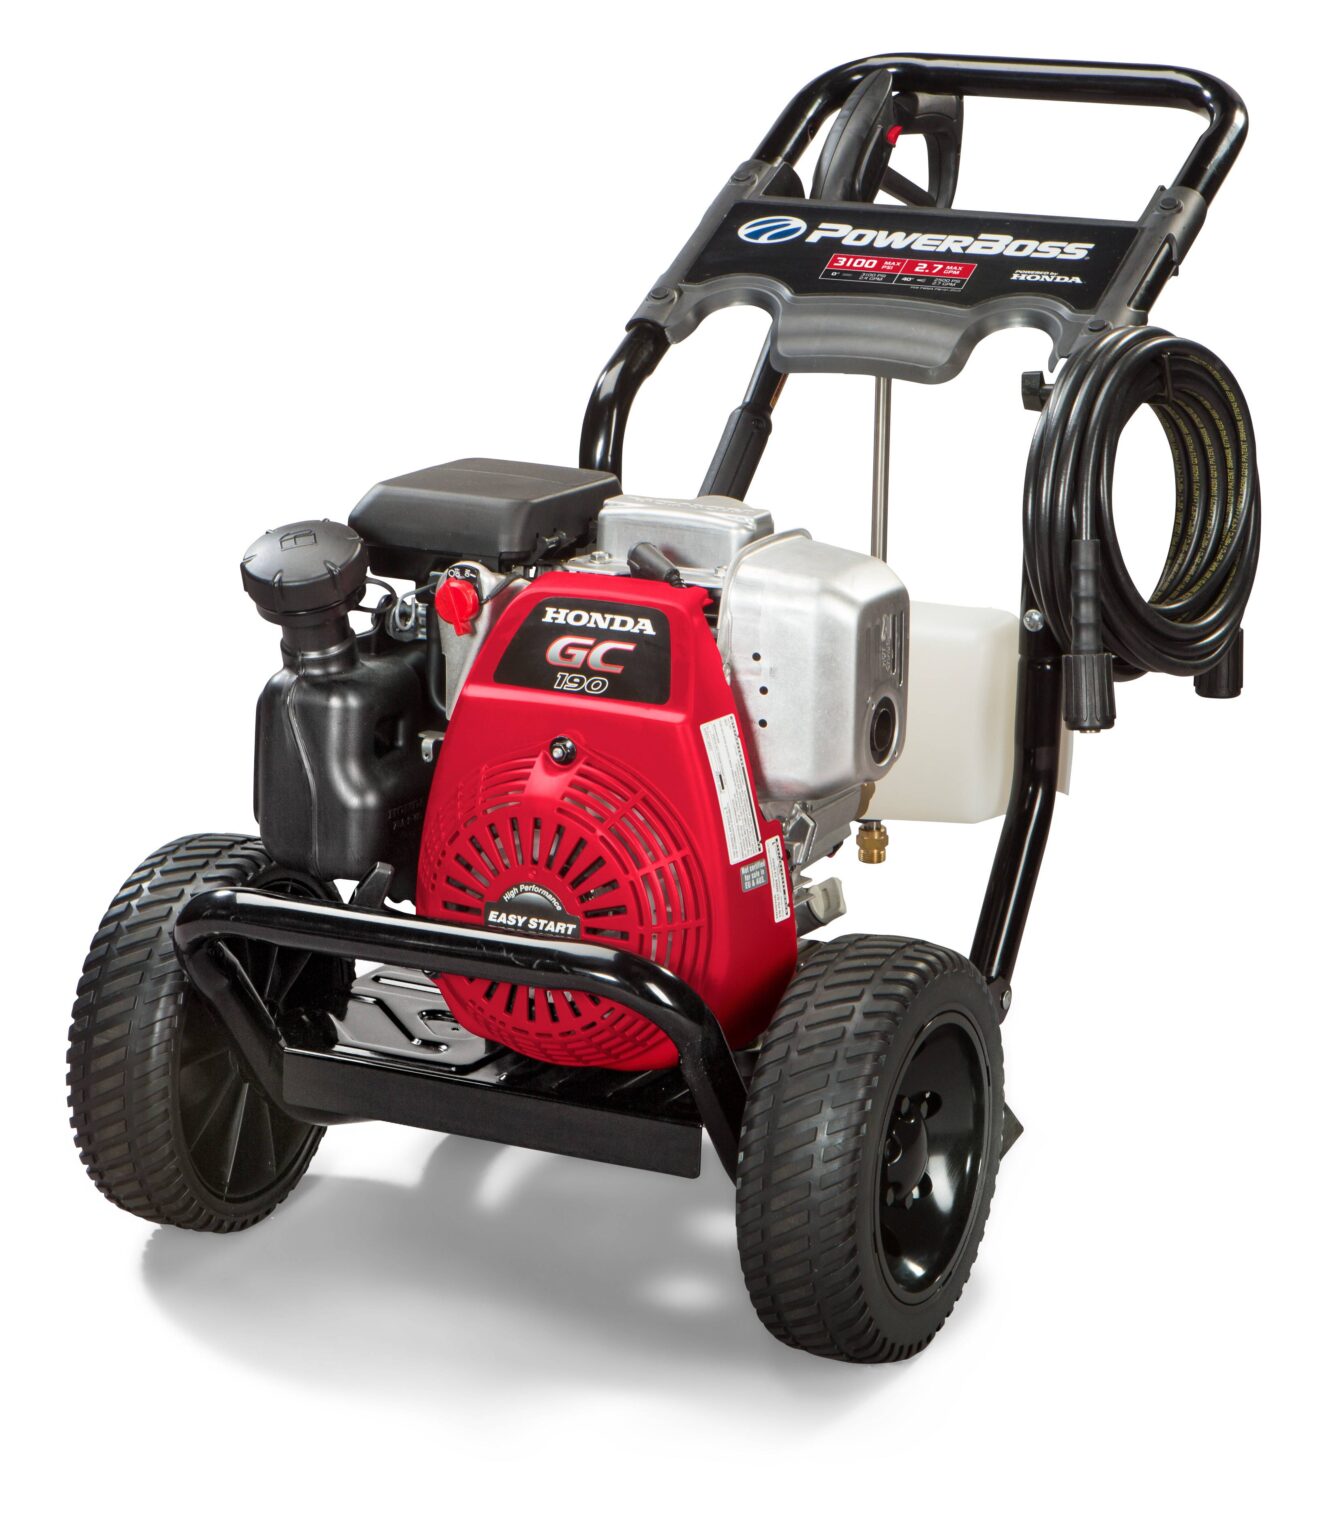 Top 7 Best Gas Power Washer For Home Use Home Tested